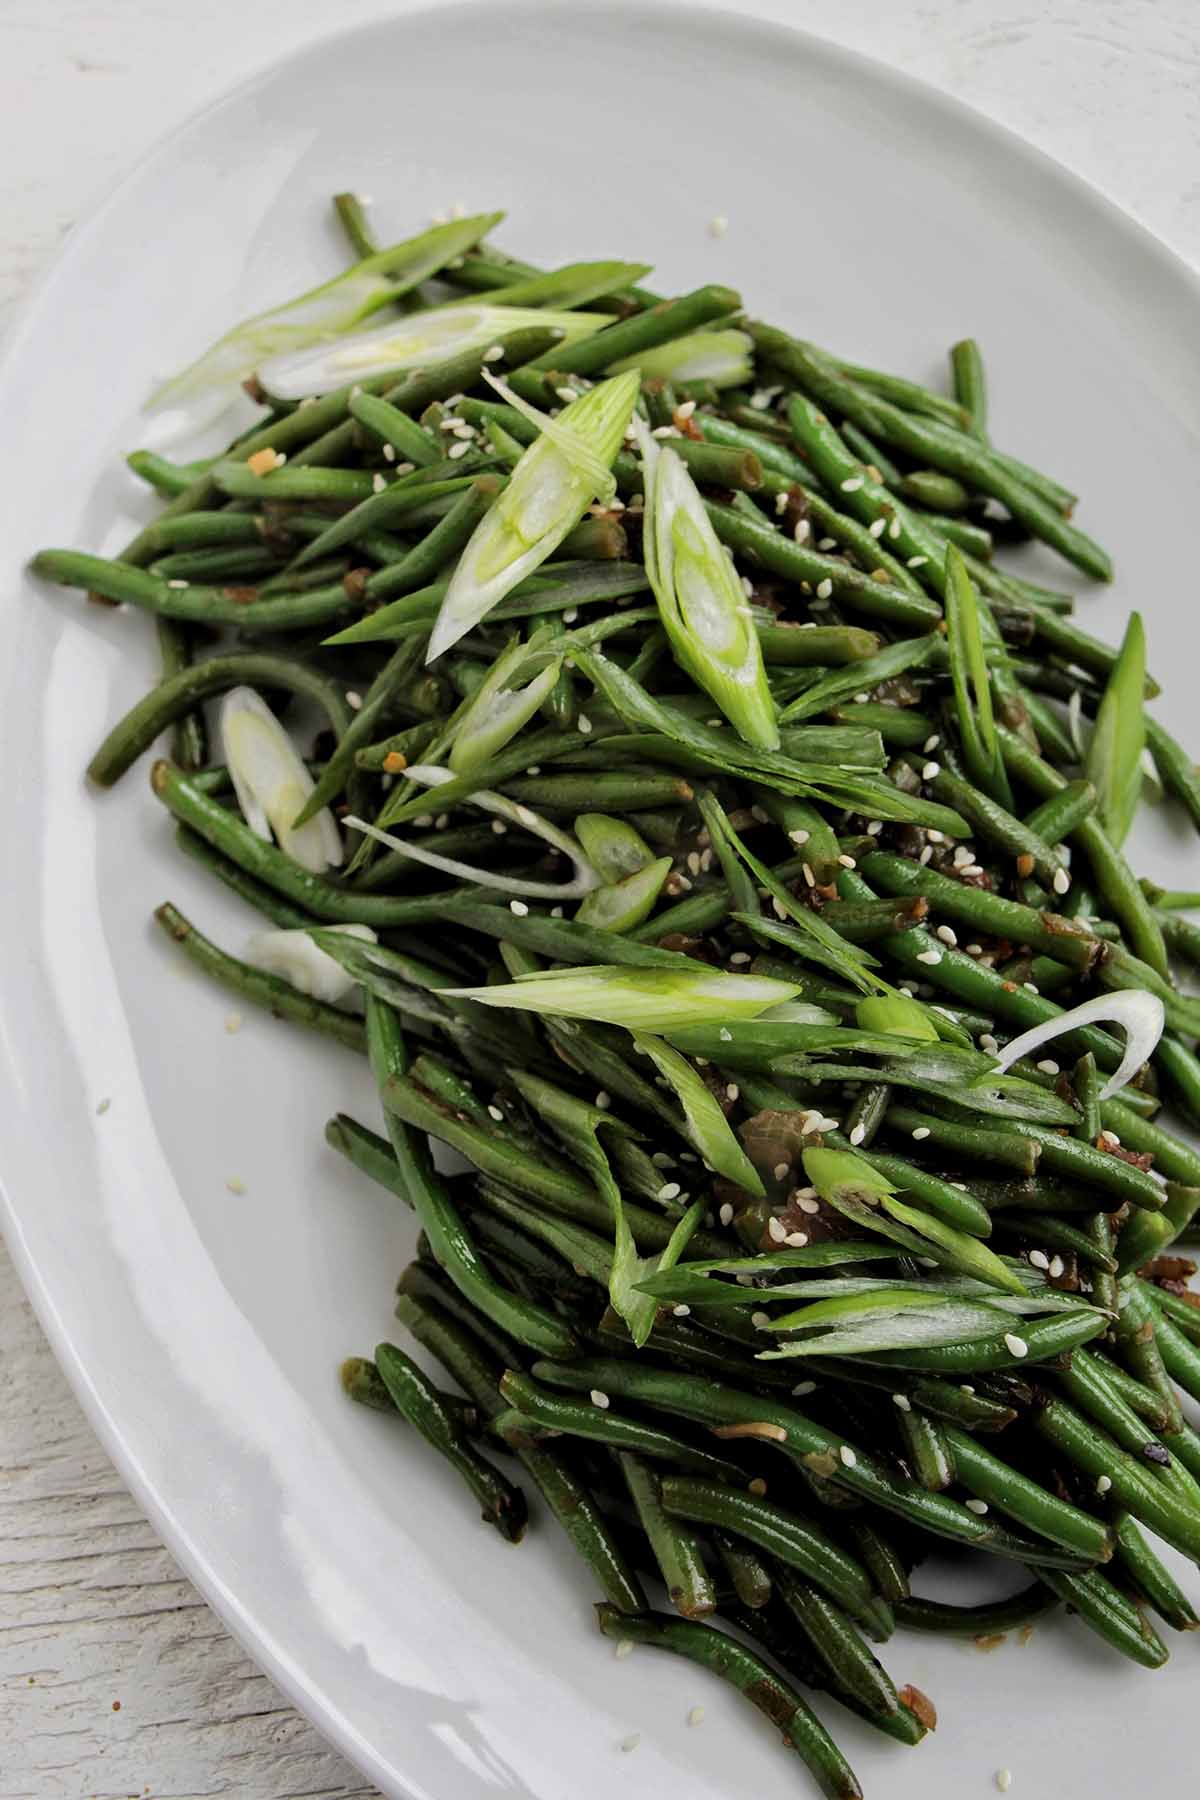 sautéed green beans garnished with green onions and sesame seeds.